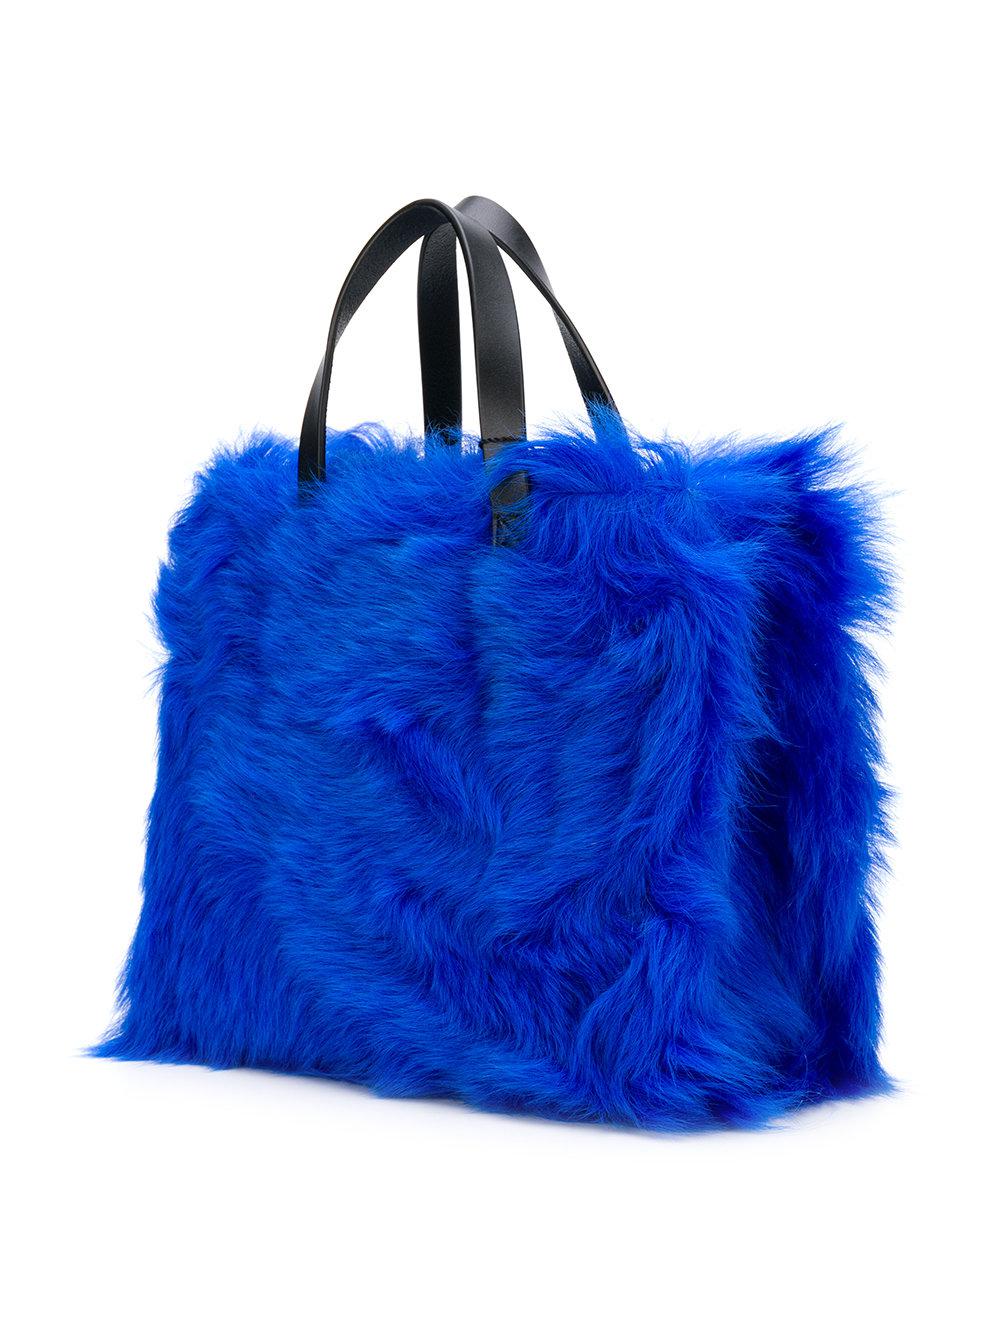 Marc Jacobs The Fur Mini Grind Tote in Blue - Lyst